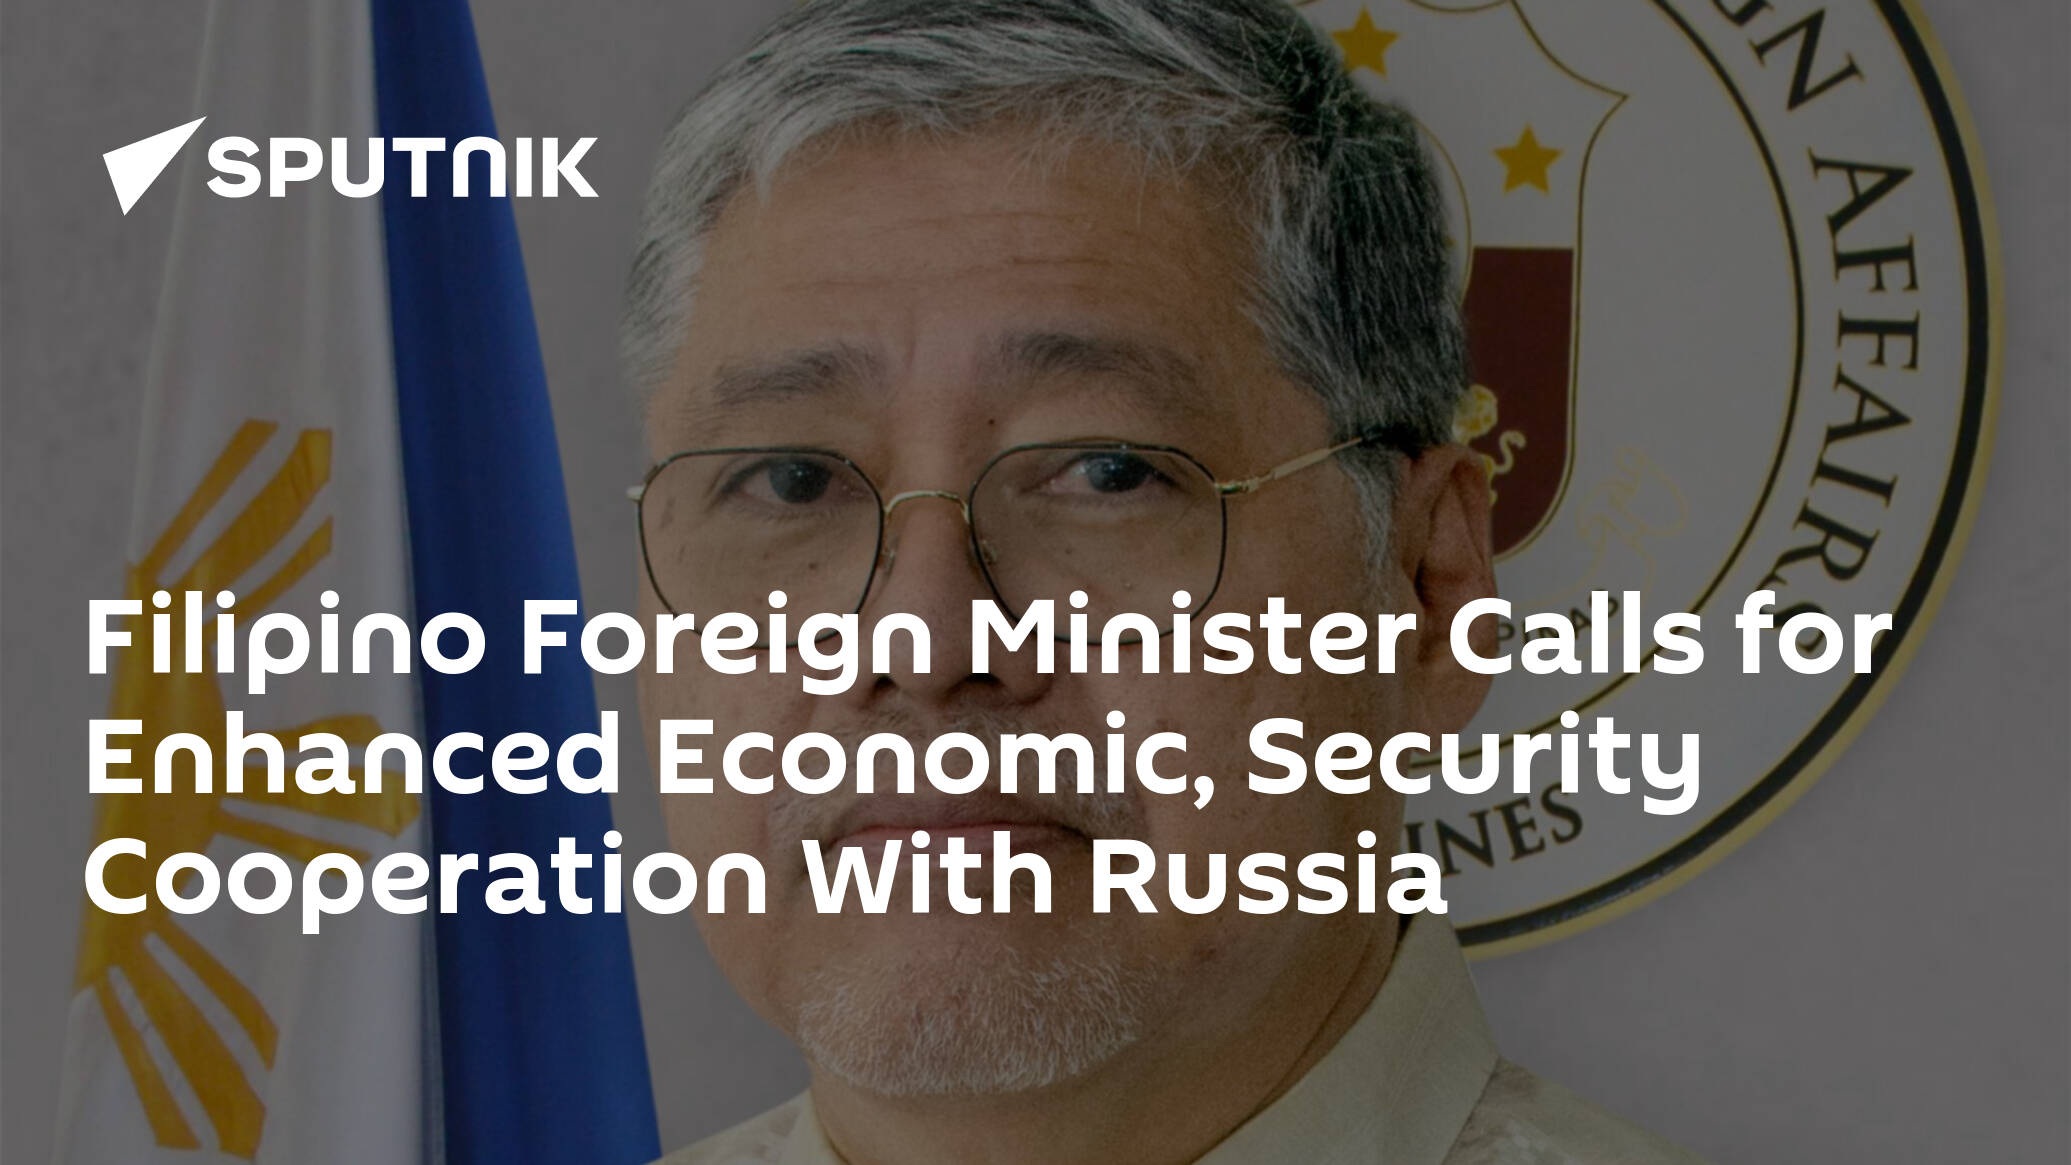 Philippine Foreign Minister Calls for Enhanced Economic, Security Cooperation With Russia